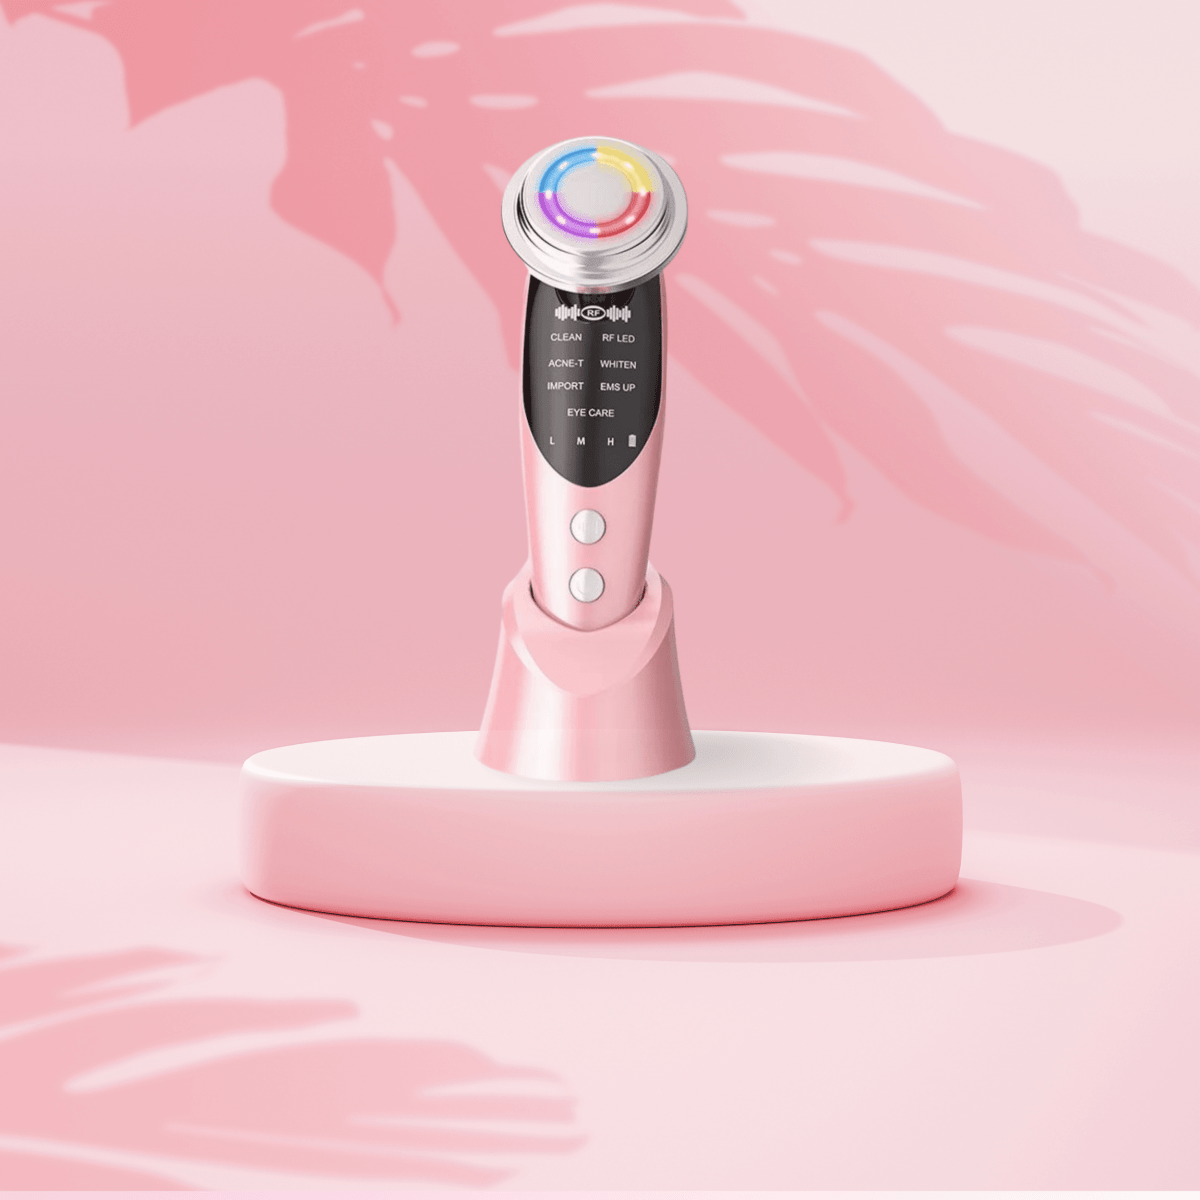 Tri-light LED therapy facial device on pink podium with the background showing shadow of palm trees